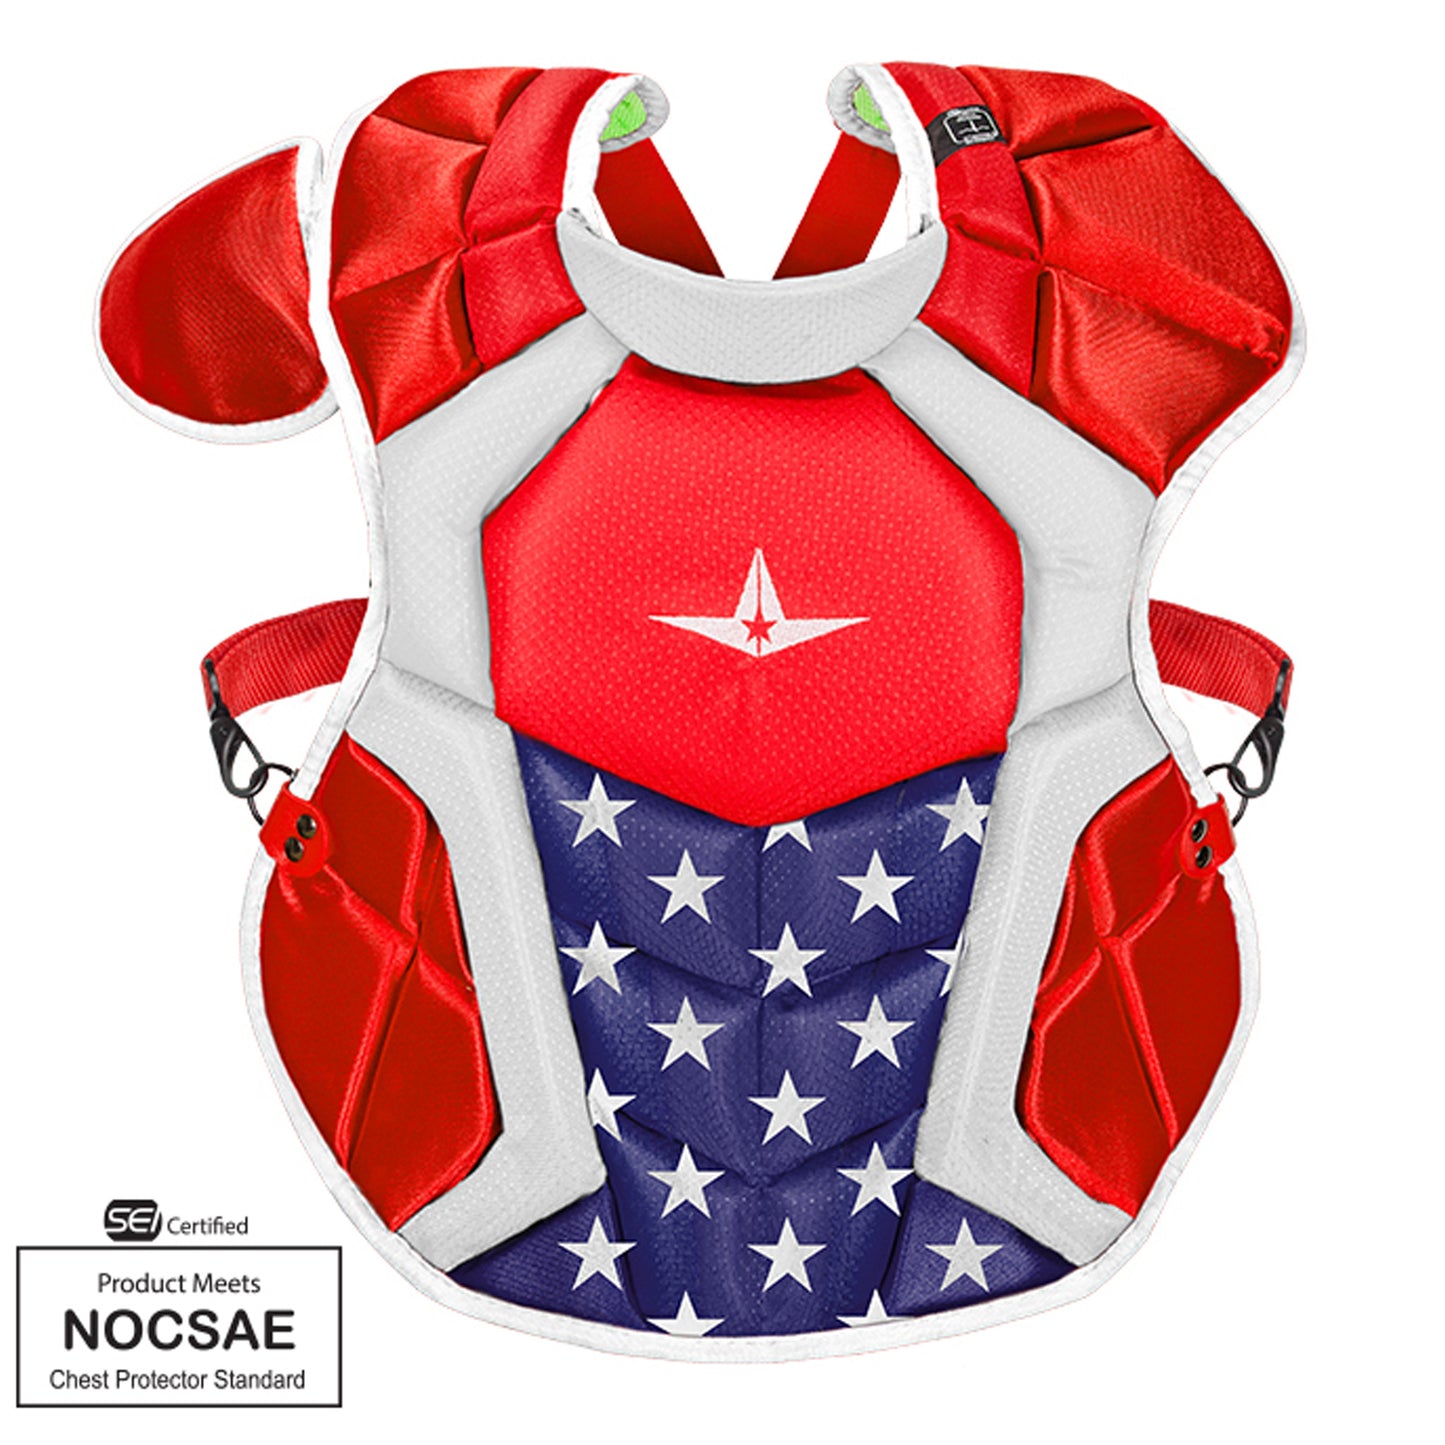 All-Star Sports S7 AXIS™ USA Catchers Gear Set, AGES 12-16, 15.5" - MEETS NOCSAE